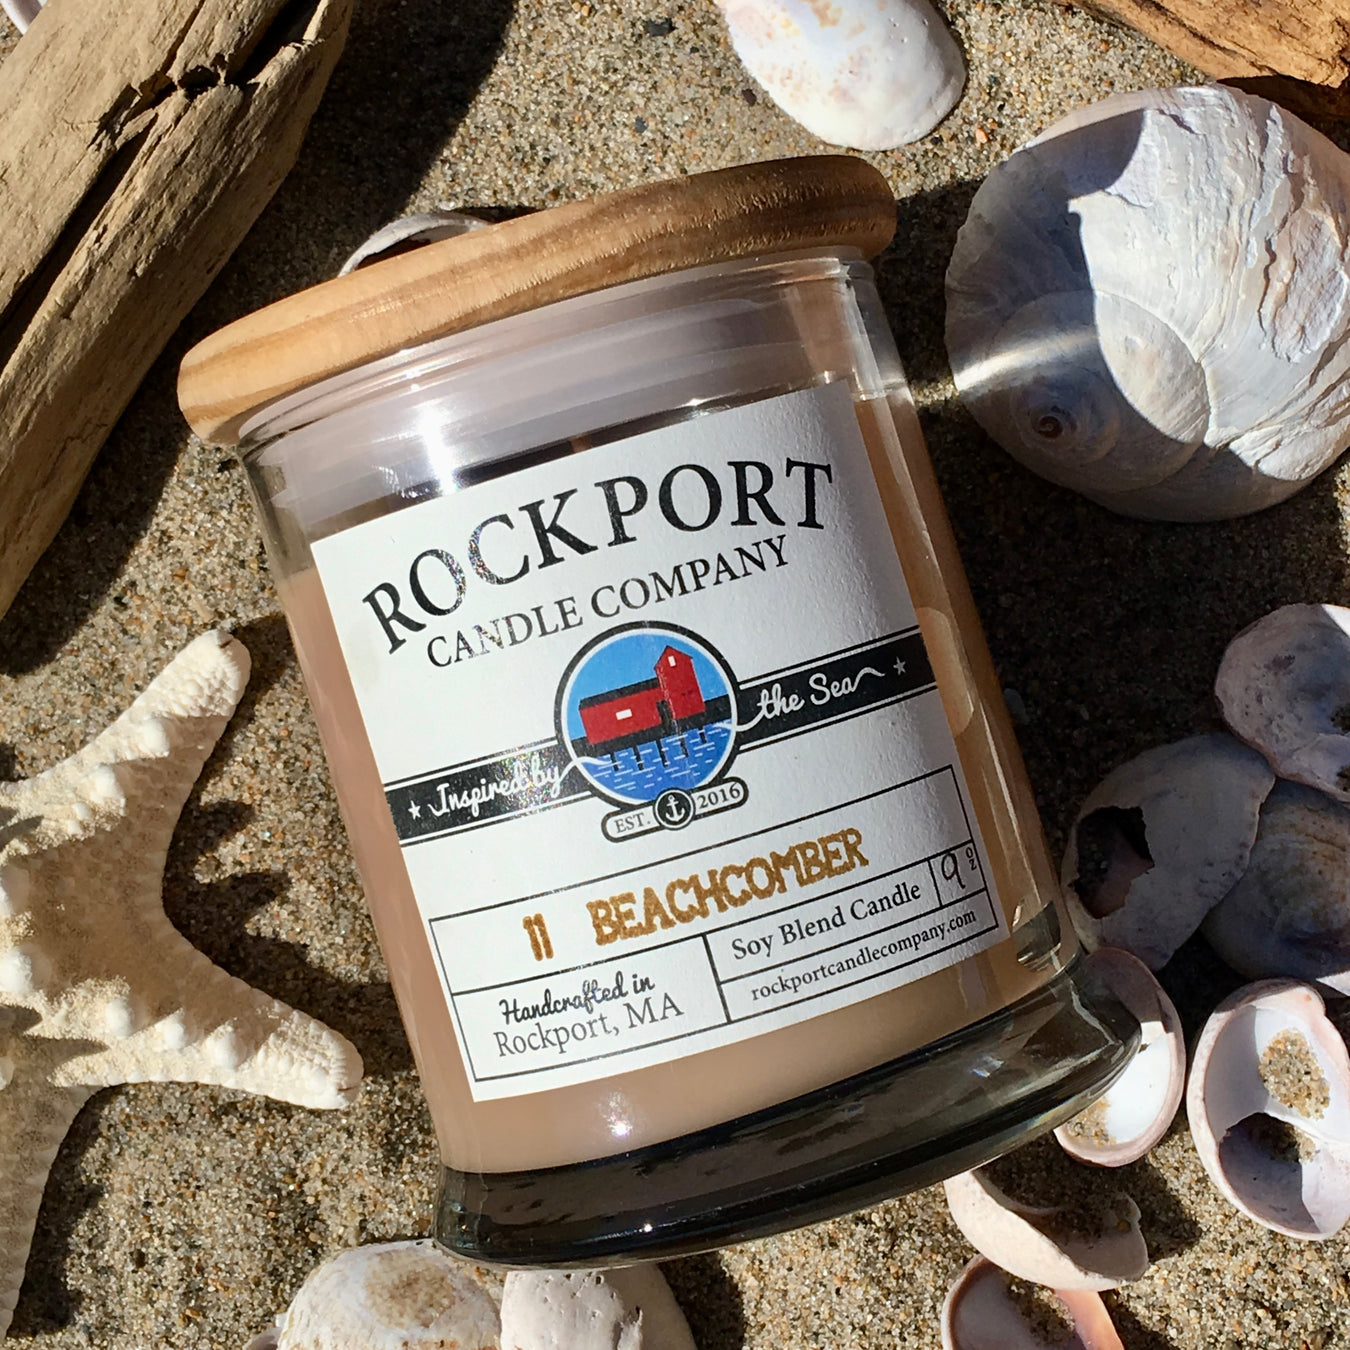 Beachcomber by Rockport Candle Company